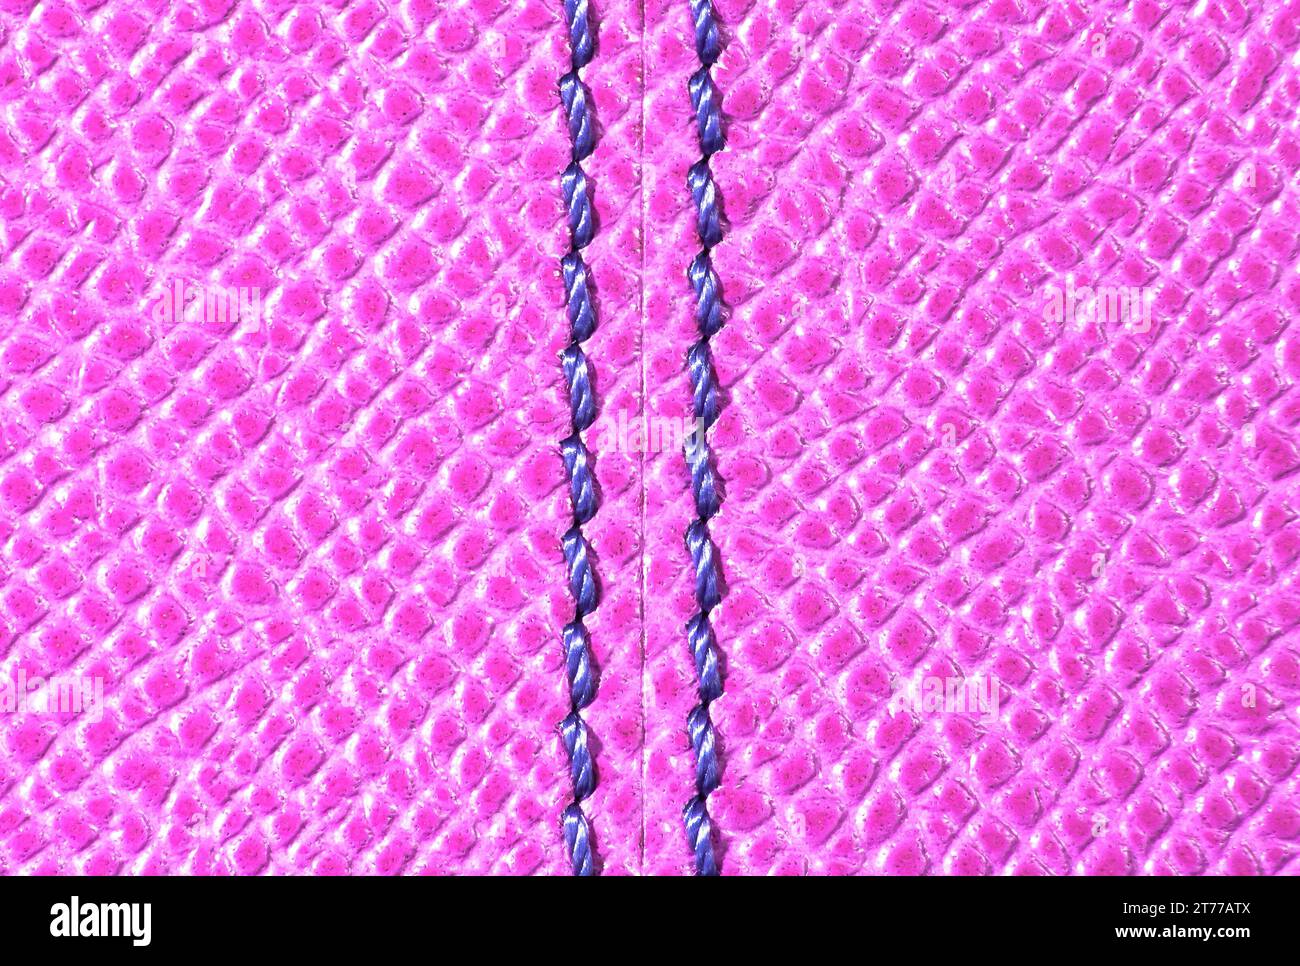 pink leather texture with blue stitching for background Stock Photo